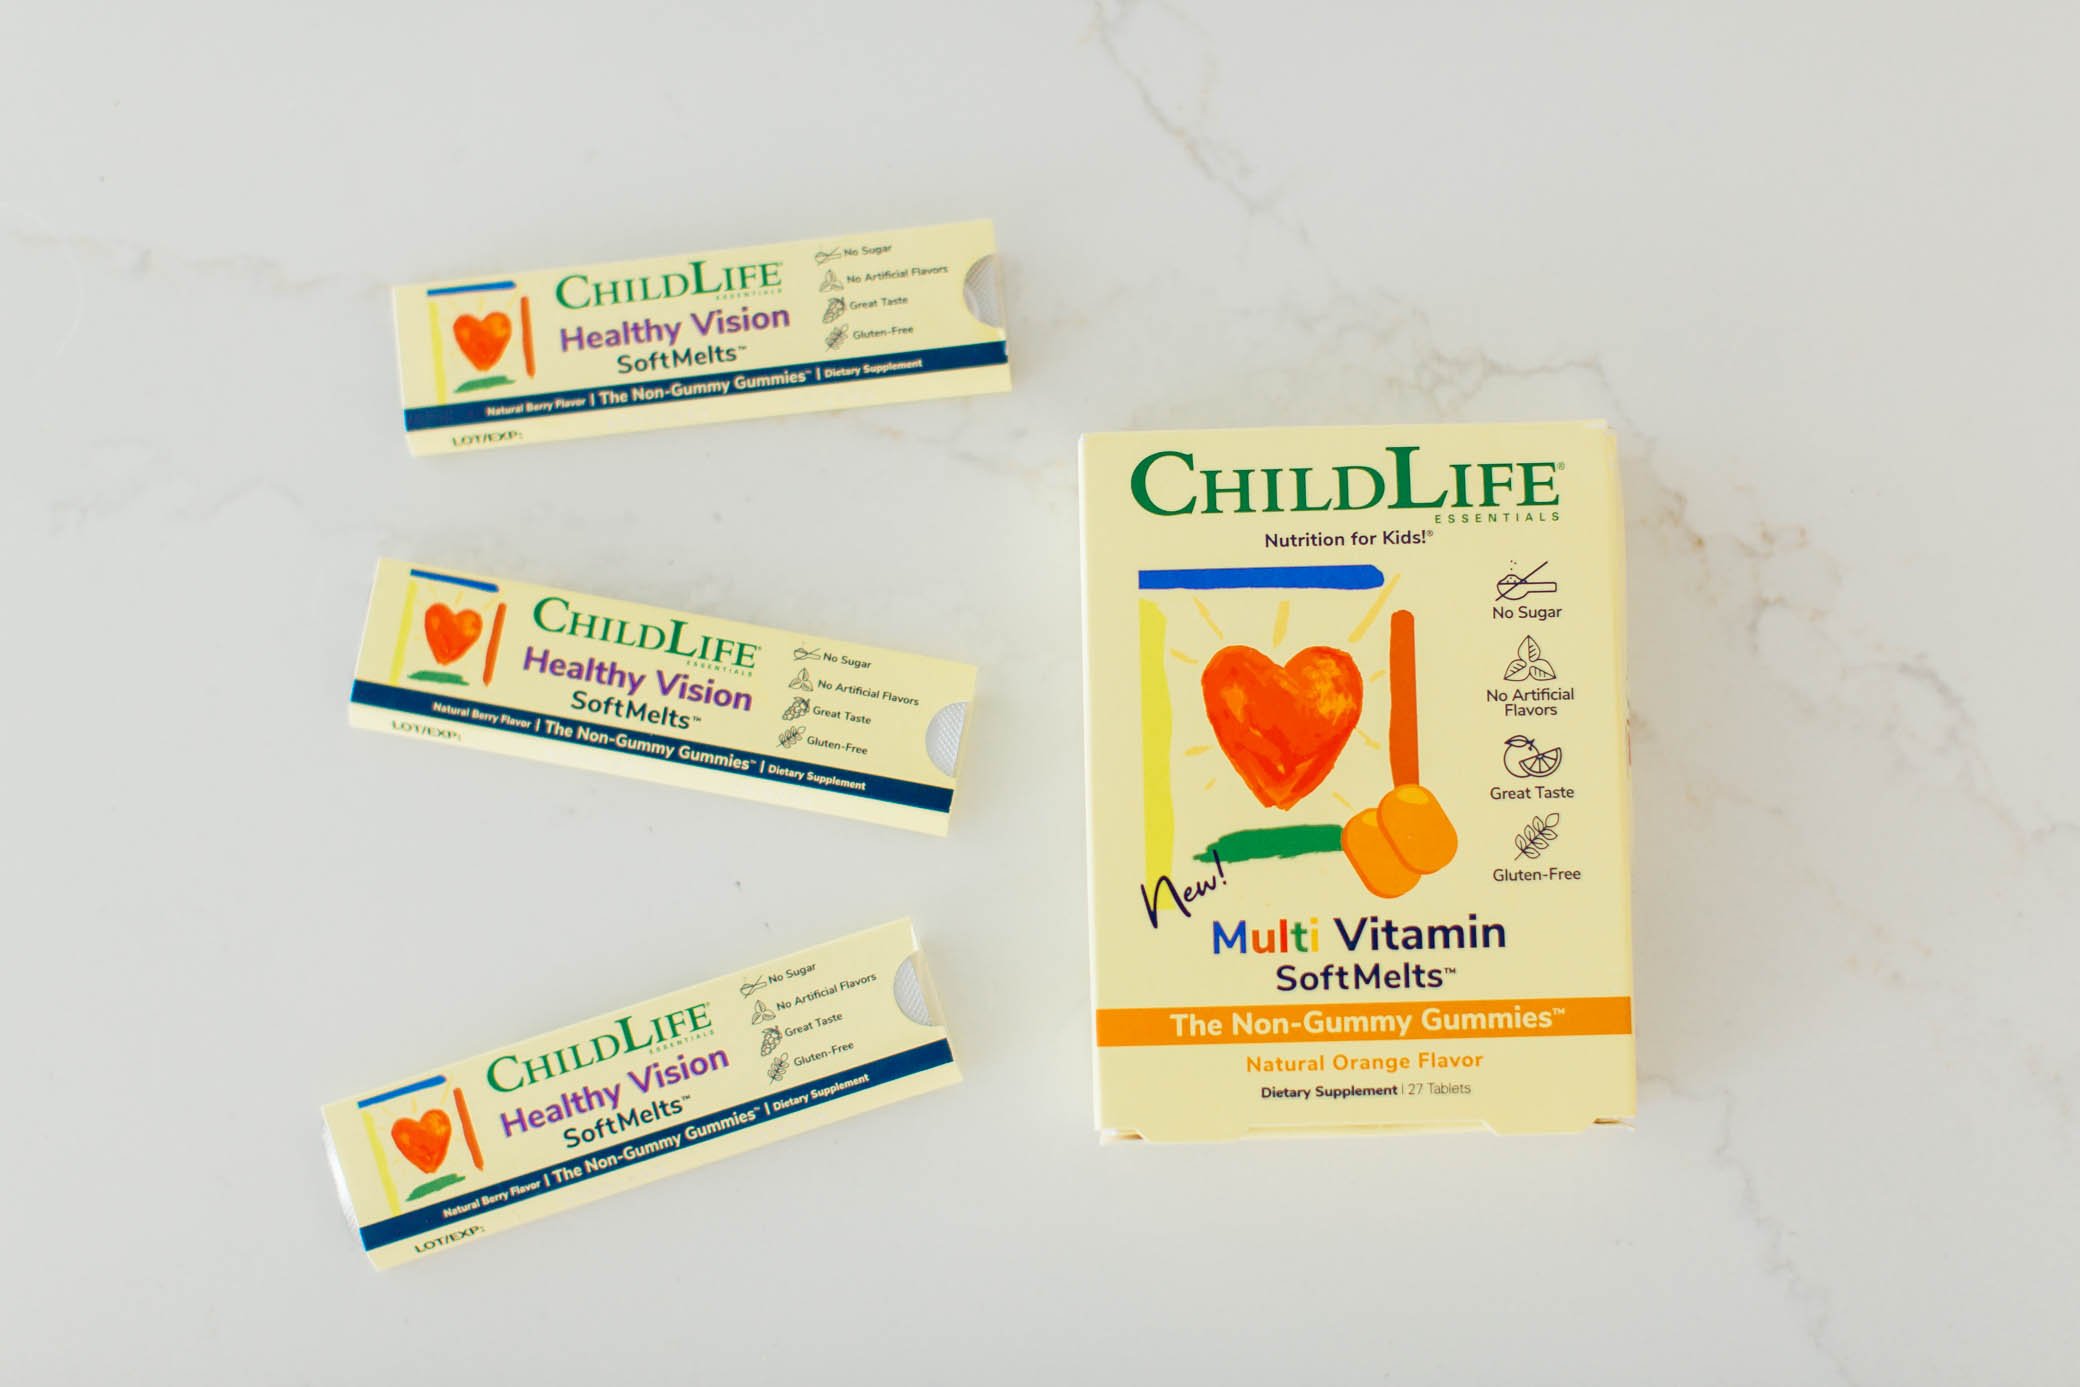 ChildLife Essentials New Muti Vitamin SoftMelts and Healthy Vision SoftMelts